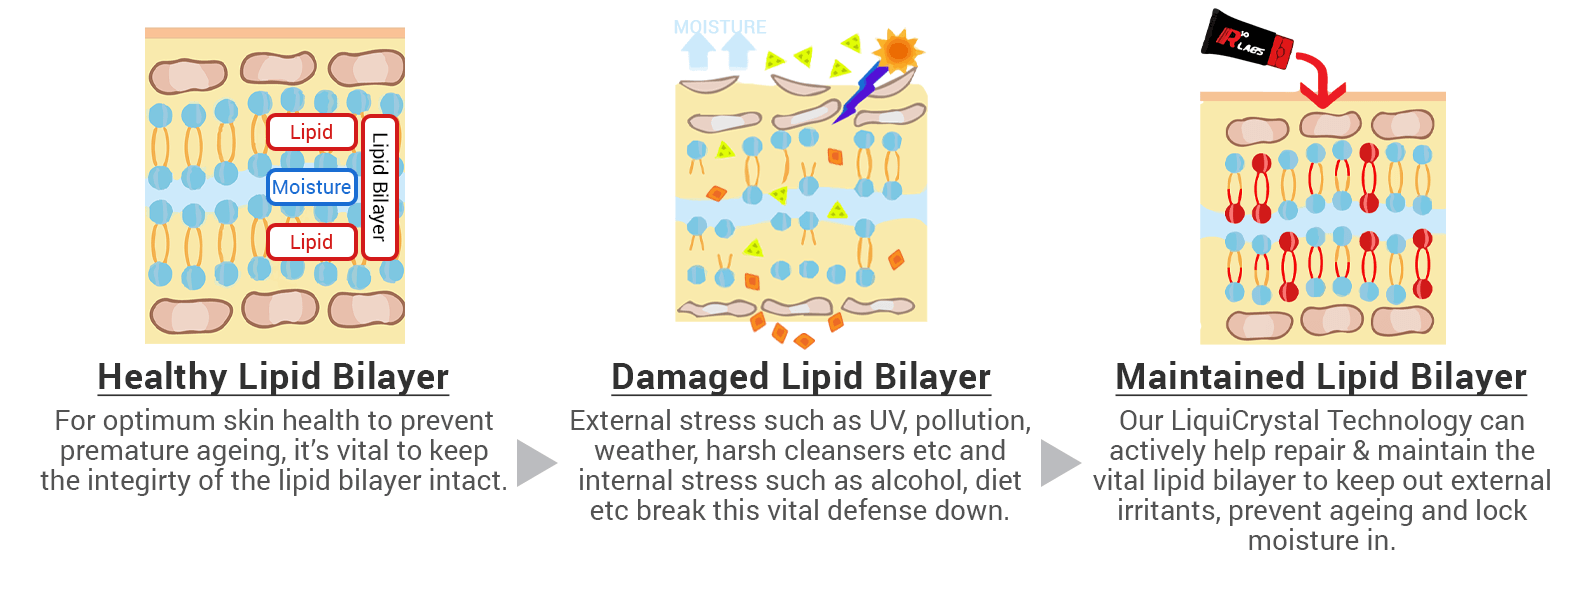 How R10 Labs Liquicrystal Mend's the Lipid Bilayer